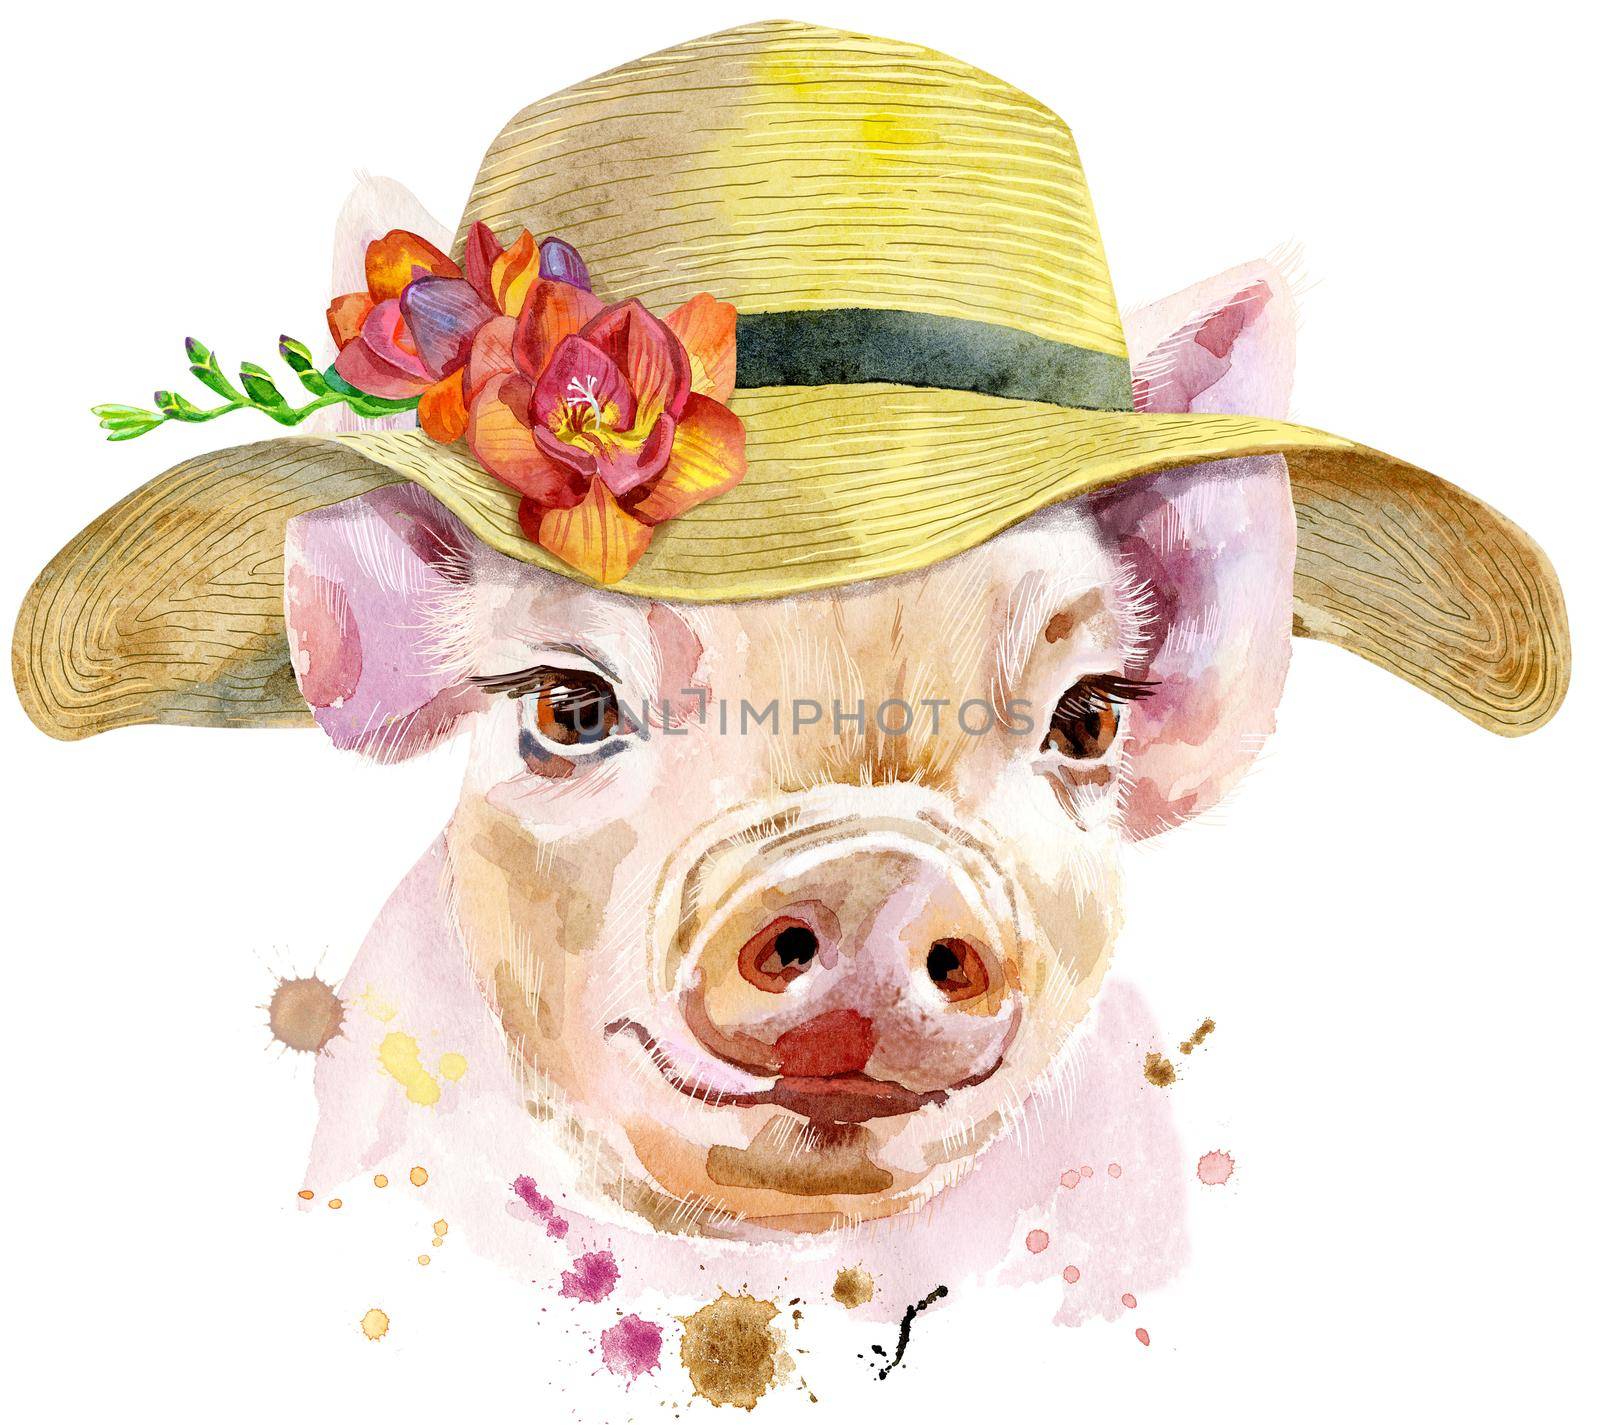 Cute piggy with summer hat. Pig for T-shirt graphics. Watercolor pink mini pig illustration